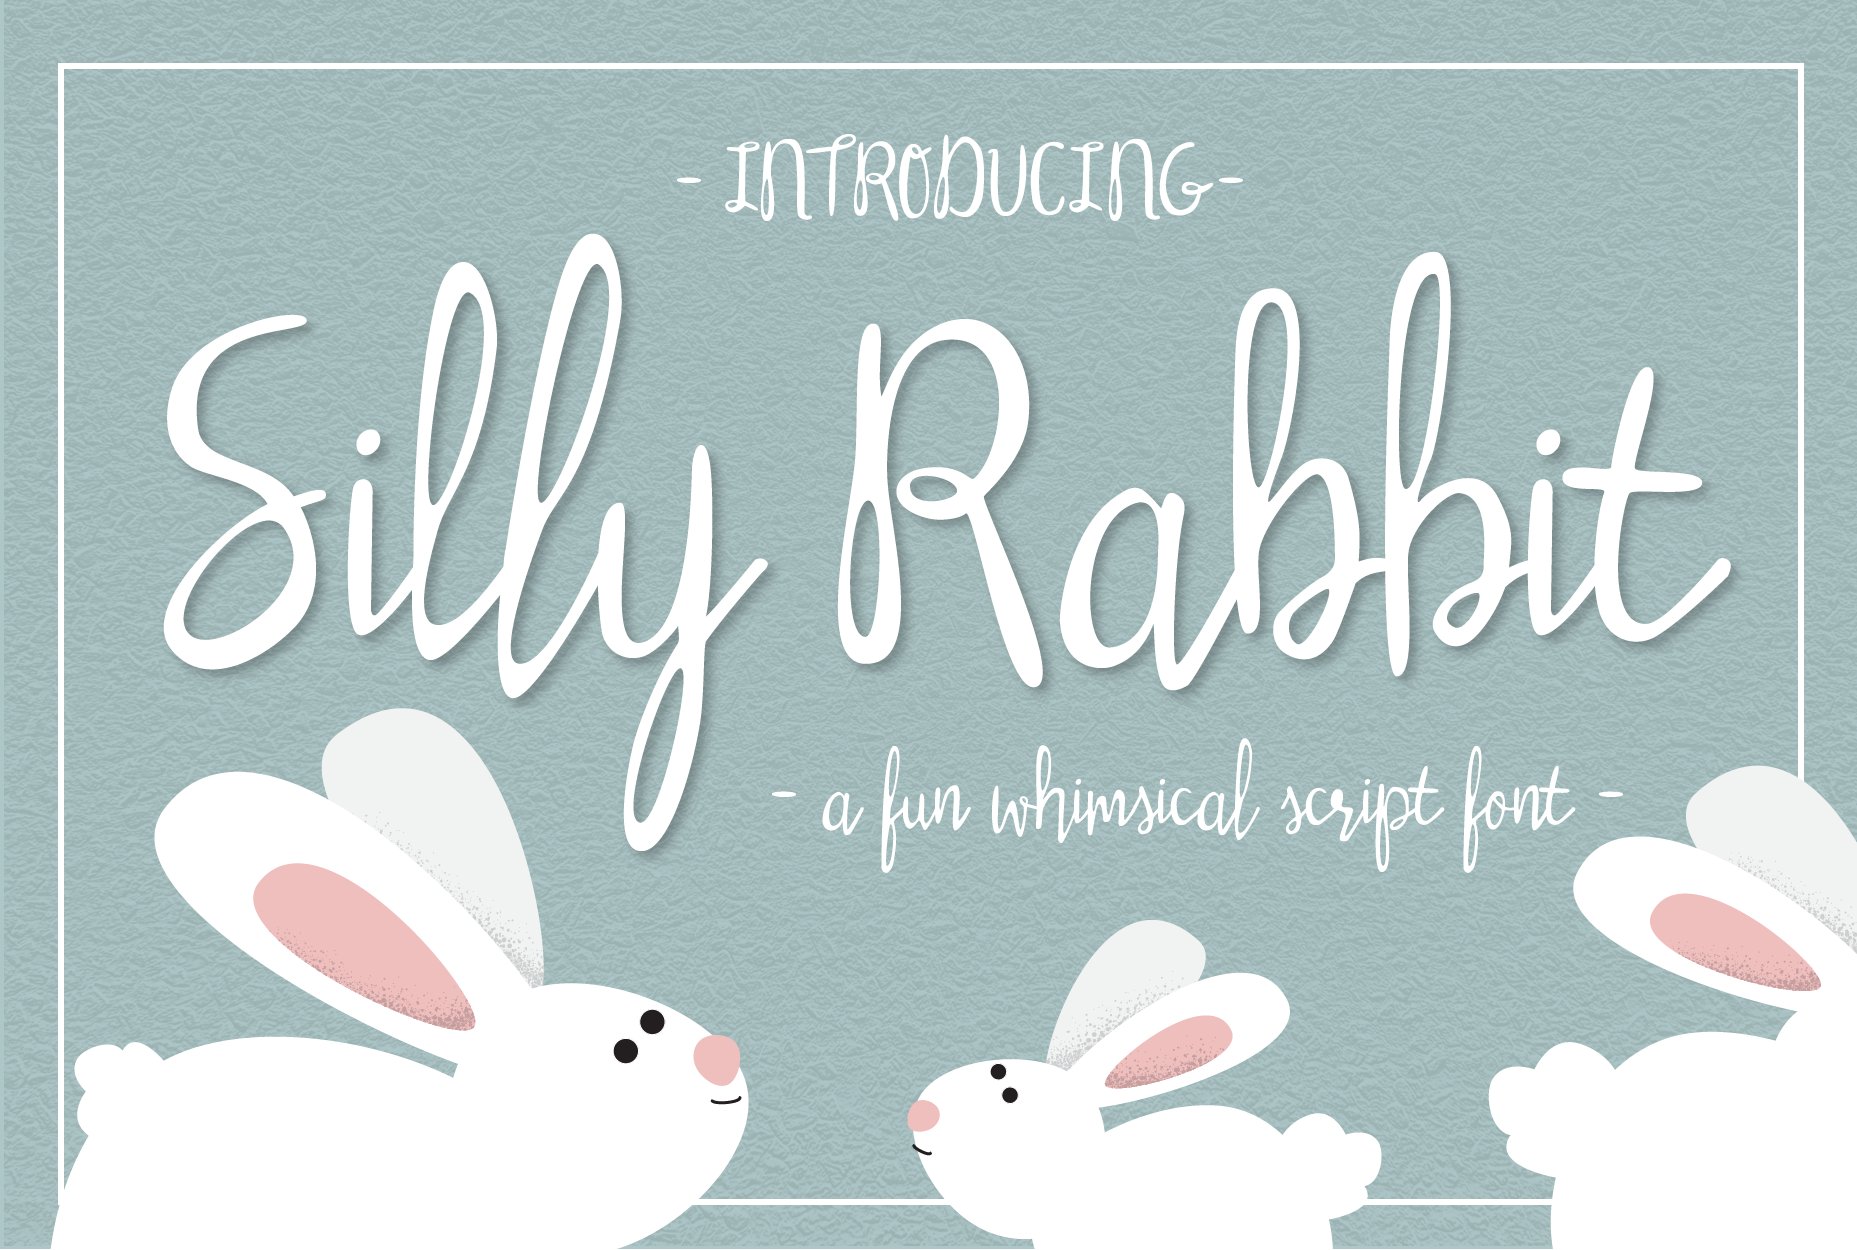 Silly Rabbit Script Font cover image.